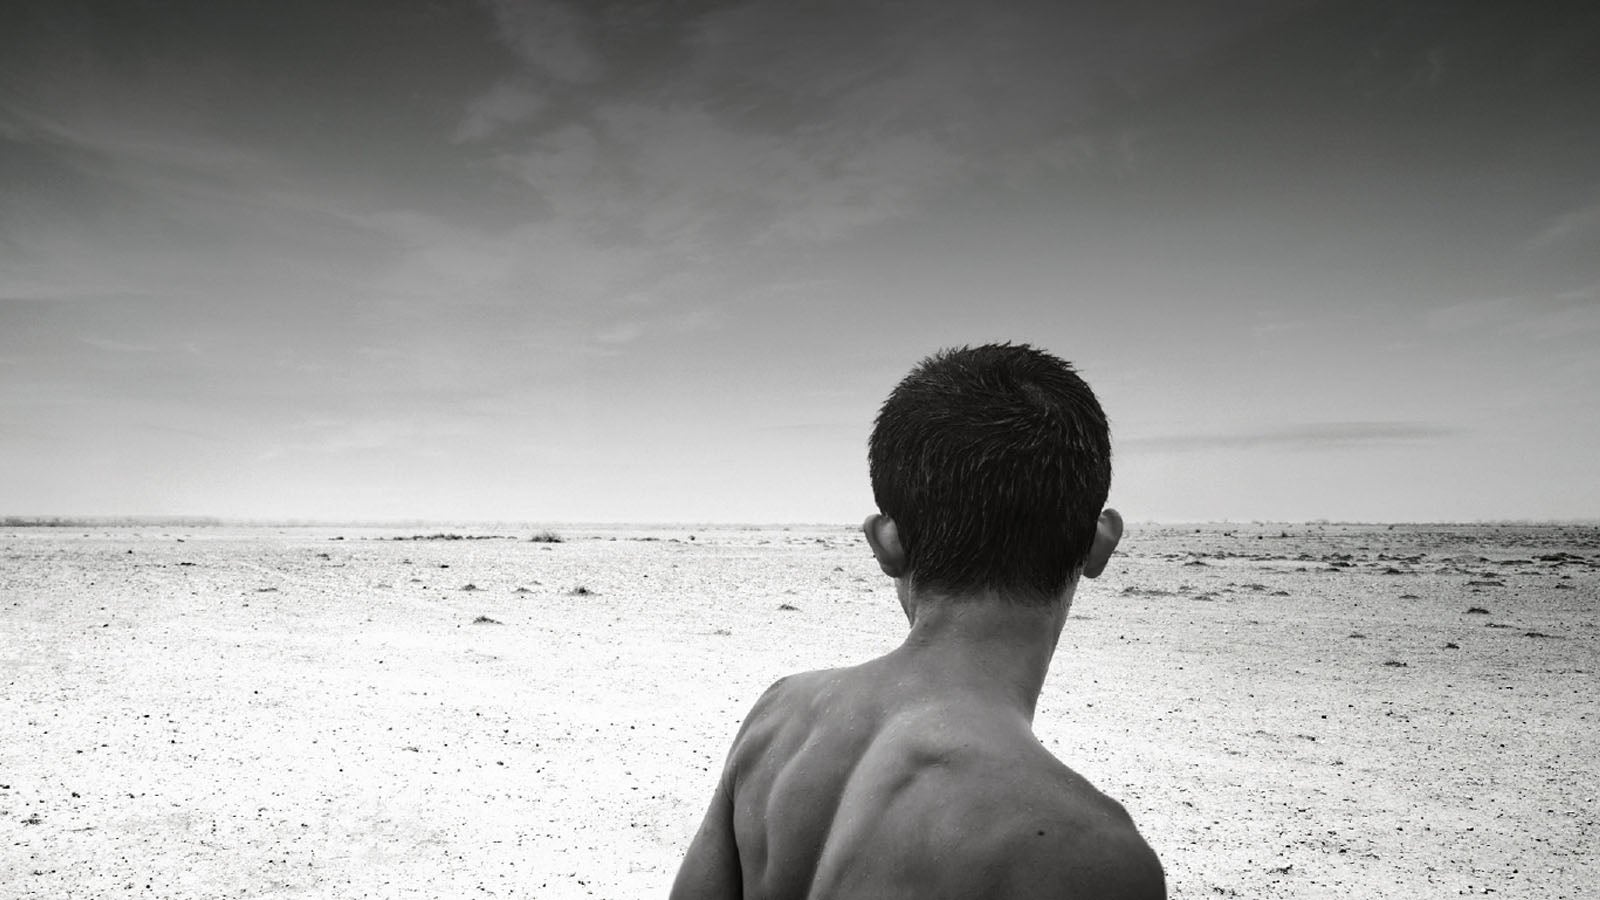 Black and white photo of a young boy looking out over a vast barren landscape